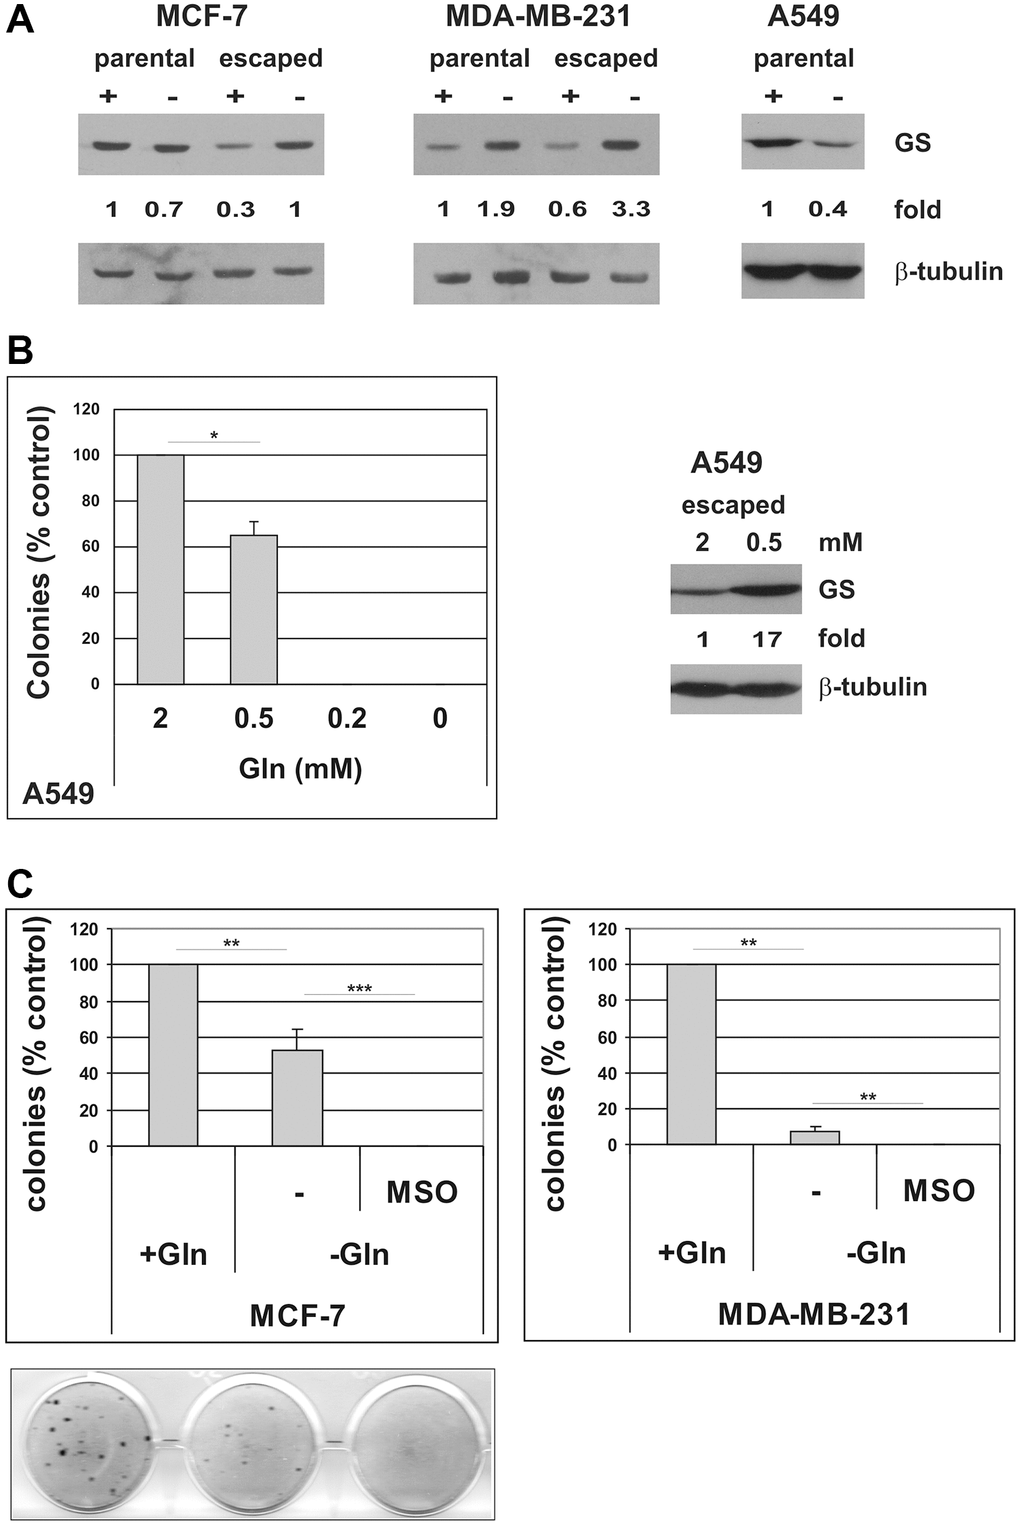 Induction of GS mediates resistance to glutamine deprivation in cells that escape from TIS. (A) Expression of GS protein was analyzed in parental MCF-7, MDA-MB-231 and A549 cells, grown in the presence or in the absence of glutamine for 72 hours, and in escaped clones arisen in the presence or in the absence of glutamine. Filters were stripped and reprobed with anti-β-tubulin antibodies as a loading control. GS levels, normalized to the relative β-tubulin levels, are reported as fold change of Gln-supplemented parental cells. (B) Left panel: doxorubicin-induced senescent A549 cells were grown in media with different glutamine concentrations. Colonies that evaded the senescent growth arrest were stained and counted. Data are mean ± S.D. of two independent experiments. Right panel: expression of GS protein was analyzed in A549 escaped clones arisen in the presence of 2 mM or 0.5 mM glutamine. Filters were stripped and reprobed with anti-β-tubulin antibodies as a loading control. GS levels, normalized to the relative β-tubulin levels, are reported as fold change of Gln-supplemented sample. (C) Inhibition of GS with MSO abolishes escape from TIS in Gln-deprived conditions. Doxorubicin-induced senescent MCF-7 and MDA-MB-231 cells were grown in complete medium (+Gln) or in Gln-deprived medium (−Gln), in the presence or in the absence of 2 mM MSO. Colonies that evaded the senescent growth arrest were stained and counted. Data are mean ± S.D. of three independent experiments.